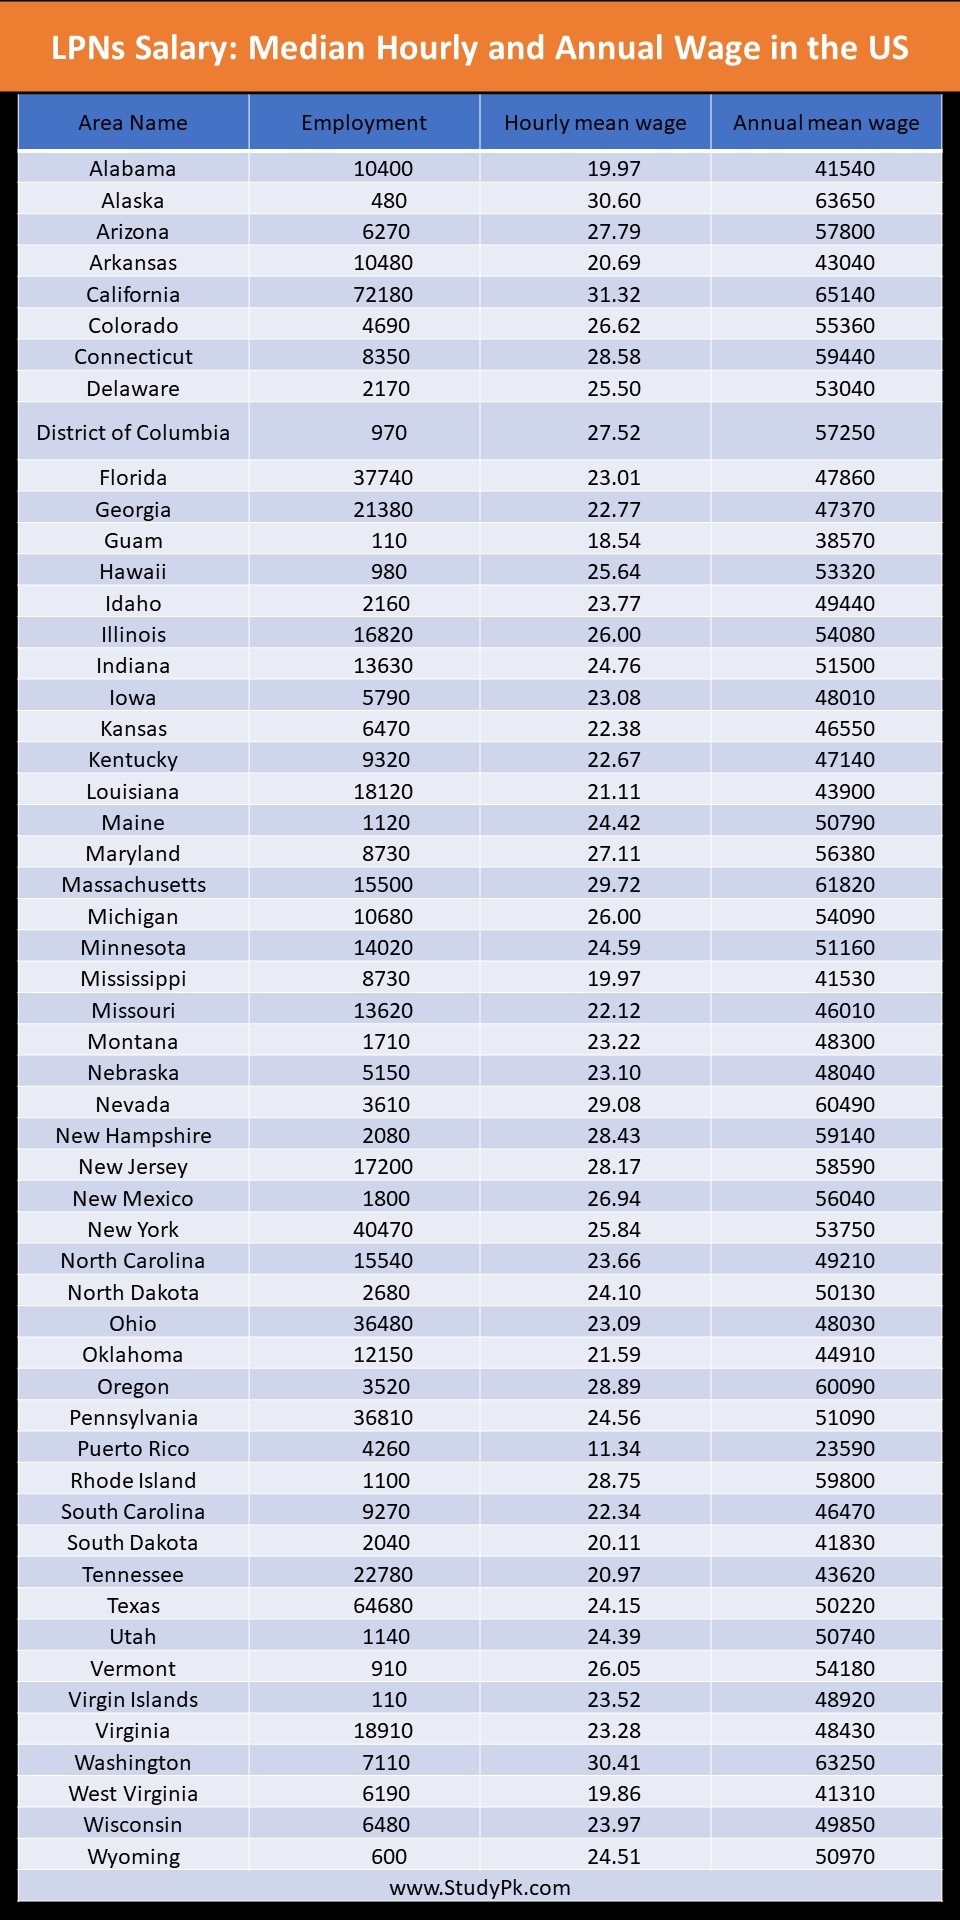 LPNs Paralegal average hourly wage & salary for all 50 states 2023